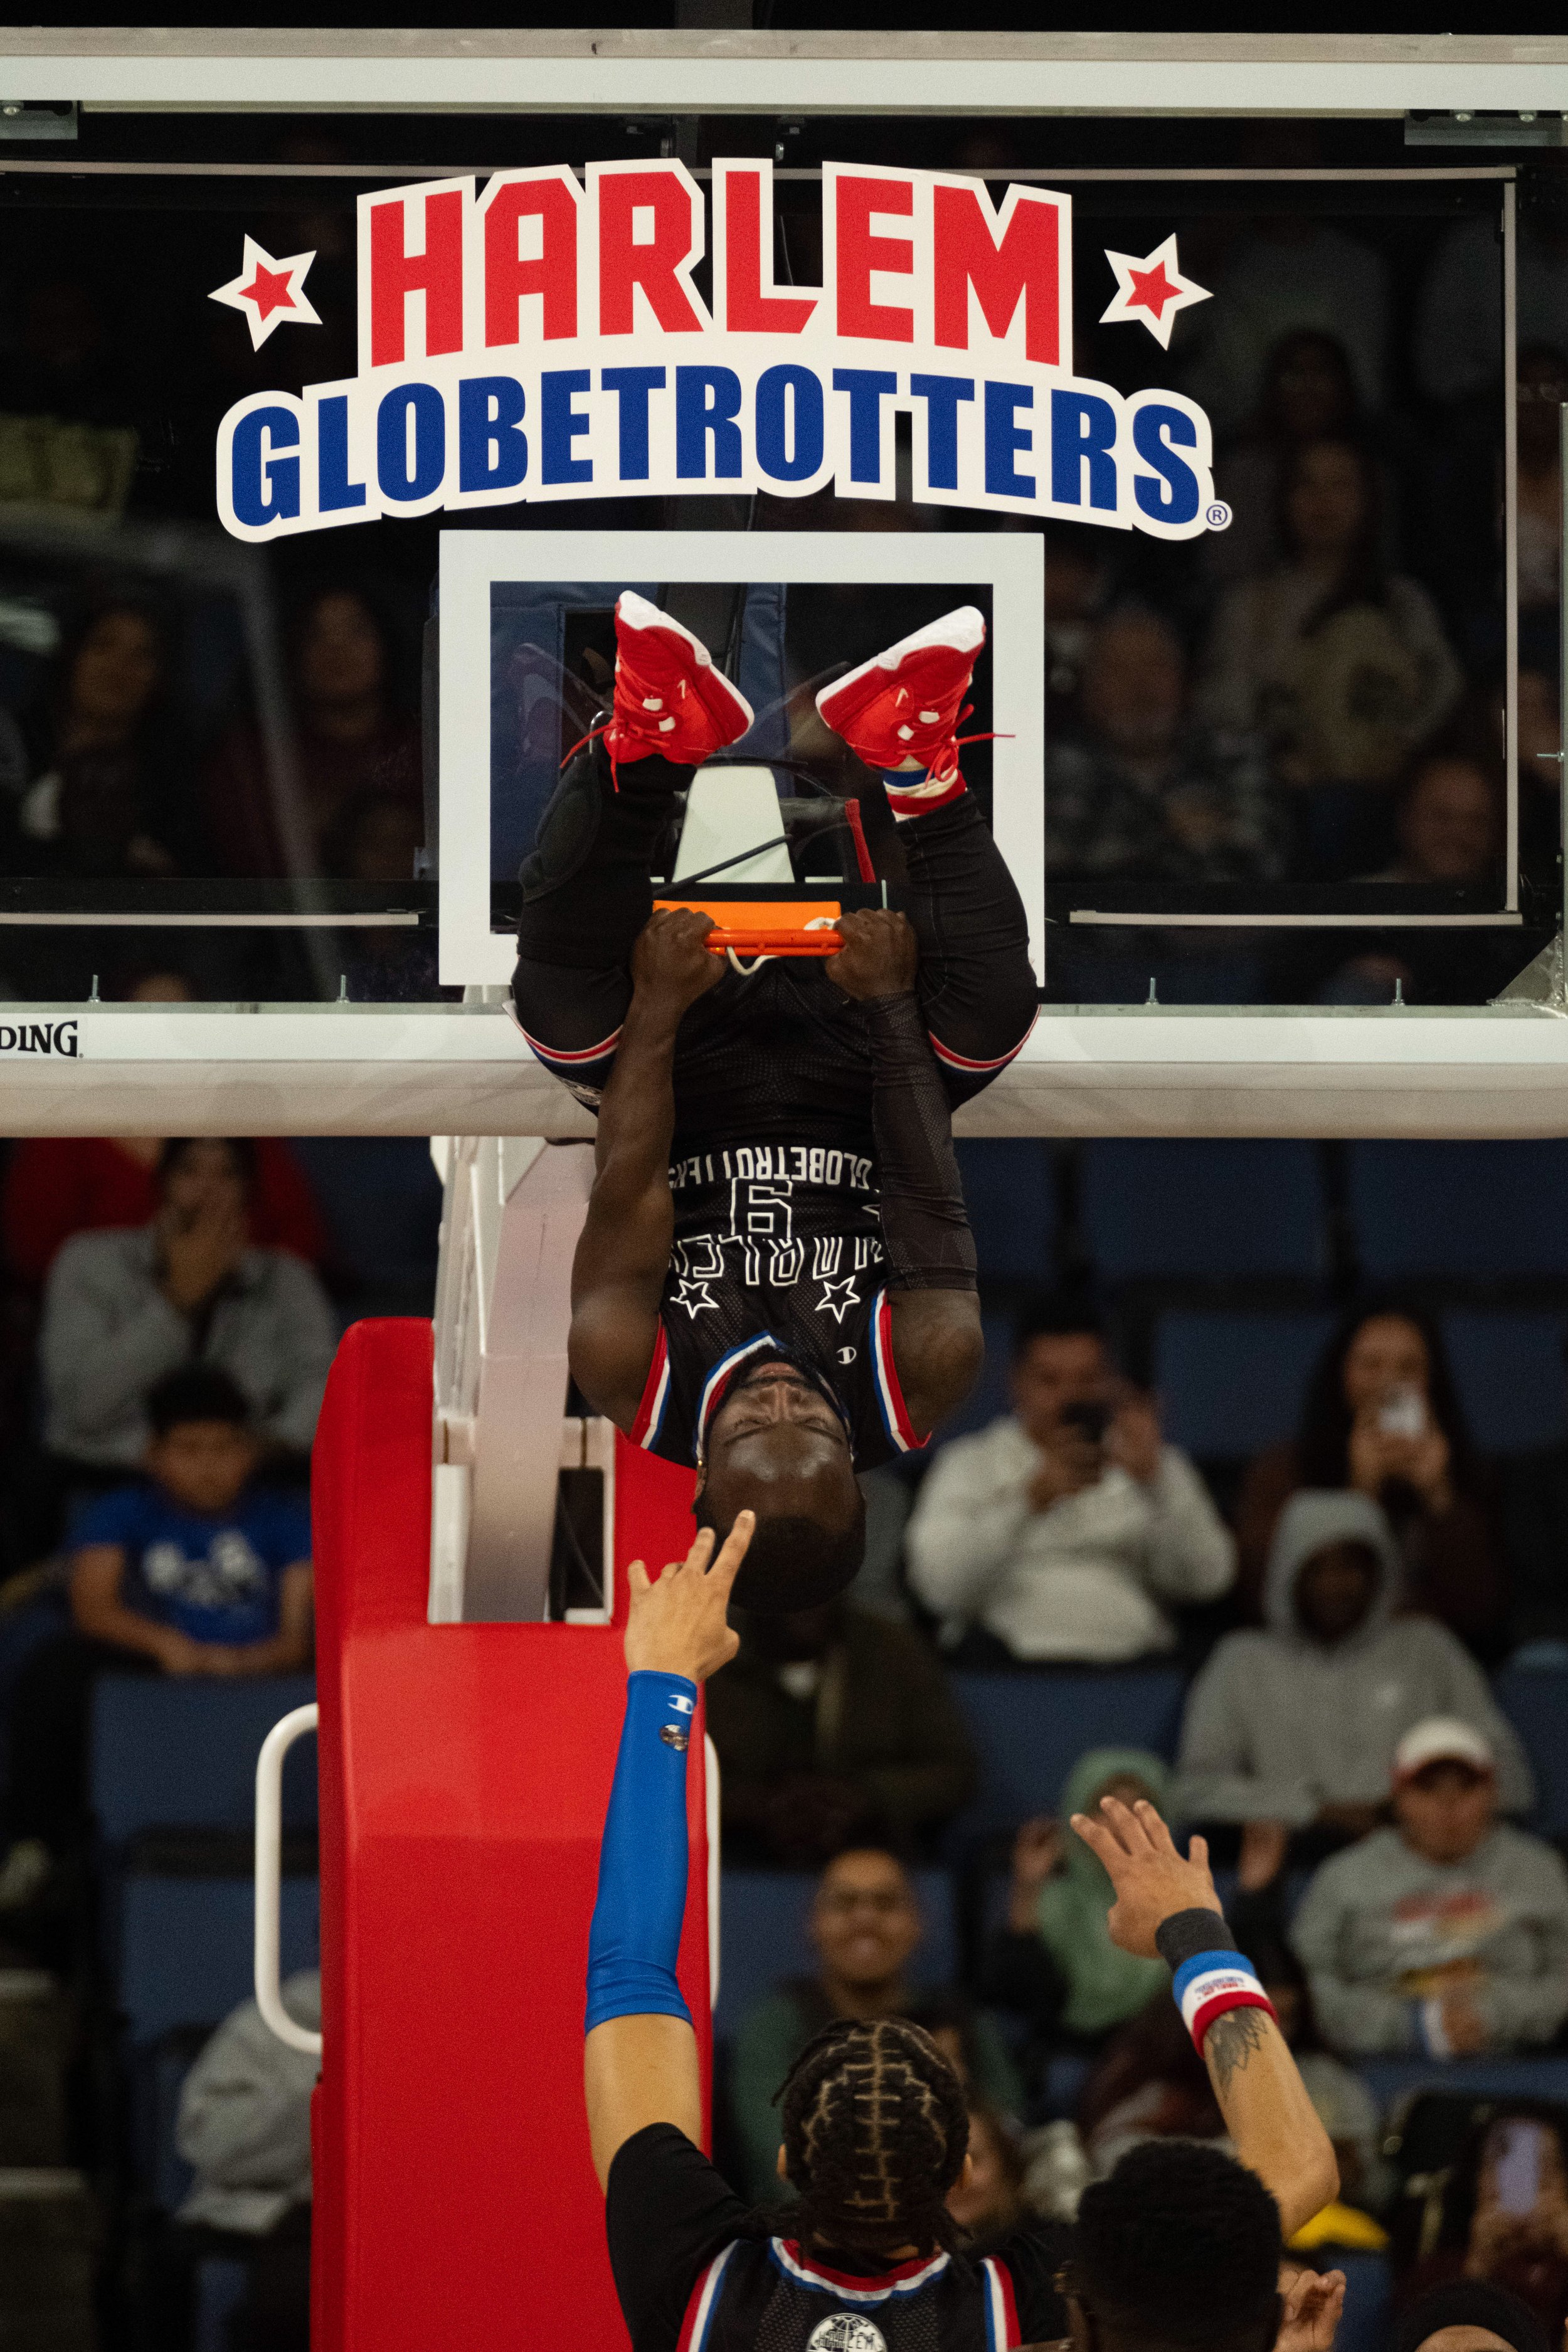  Hot Shot Swanson, guard for the Harlem Globetrotters, hanging upside down from the net at Toyota Arena in Ontario, Calif. Hot Shot dunked the ball against Washington Generals on Monday, Feb.19, 2024. (Danilo Perez | The Corsair) 